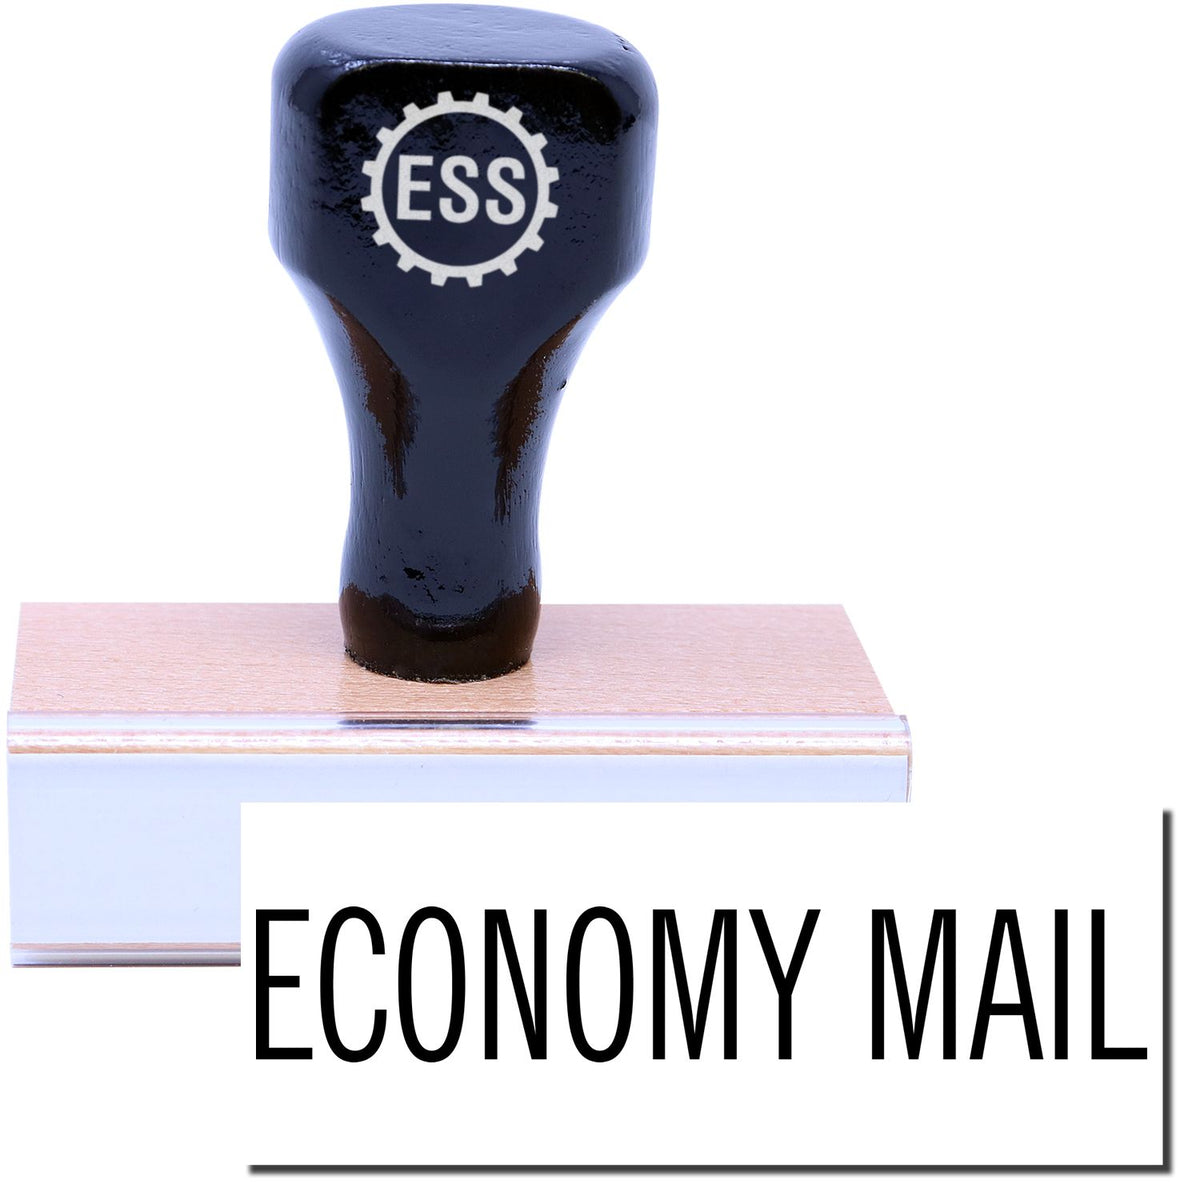 A stock office rubber stamp with a stamped image showing how the text &quot;ECONOMY MAIL&quot; is displayed after stamping.